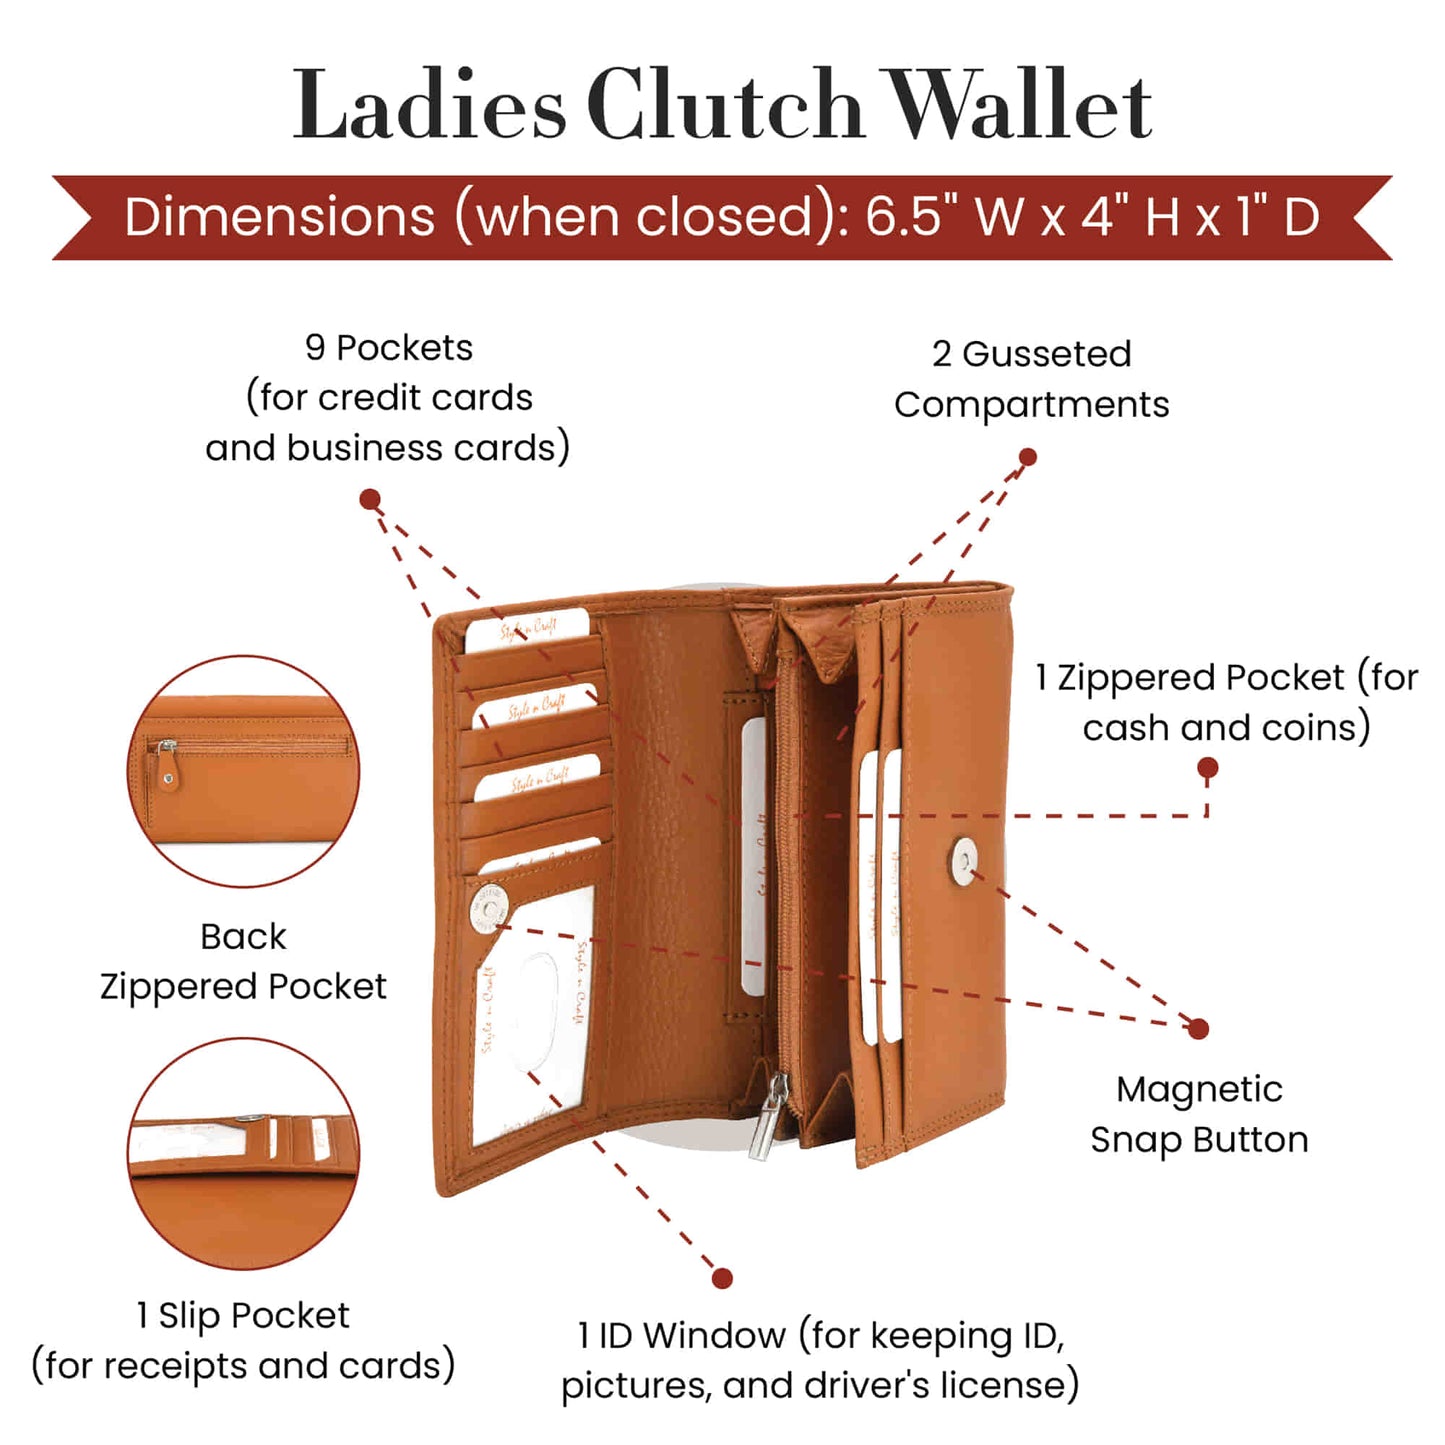 Style n Craft 300953-CG Ladies Clutch Wallet in Leather in Tan Color with RFID Protection - Open View Showing the Details